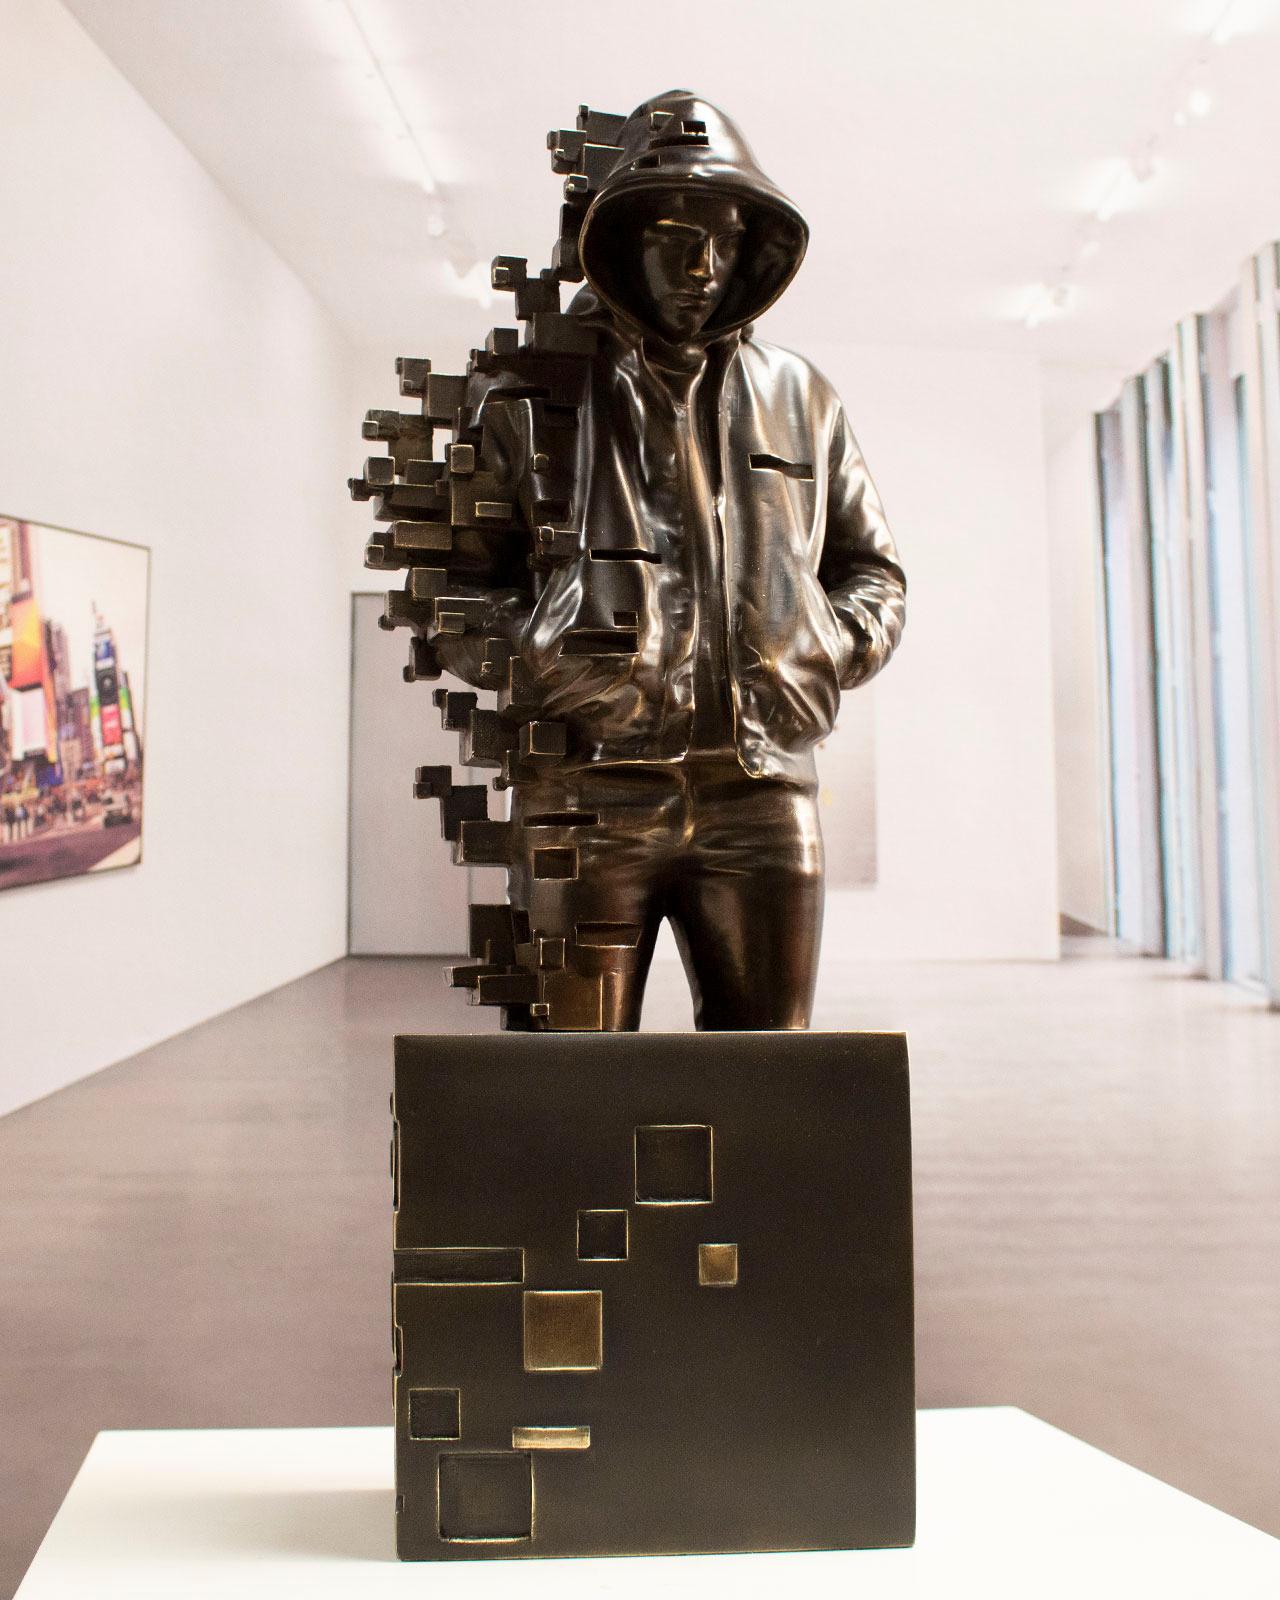 Miguel Guía Figurative Sculpture - Young Pixelated - Miguel Guia Modern Bronze layer Sculpture